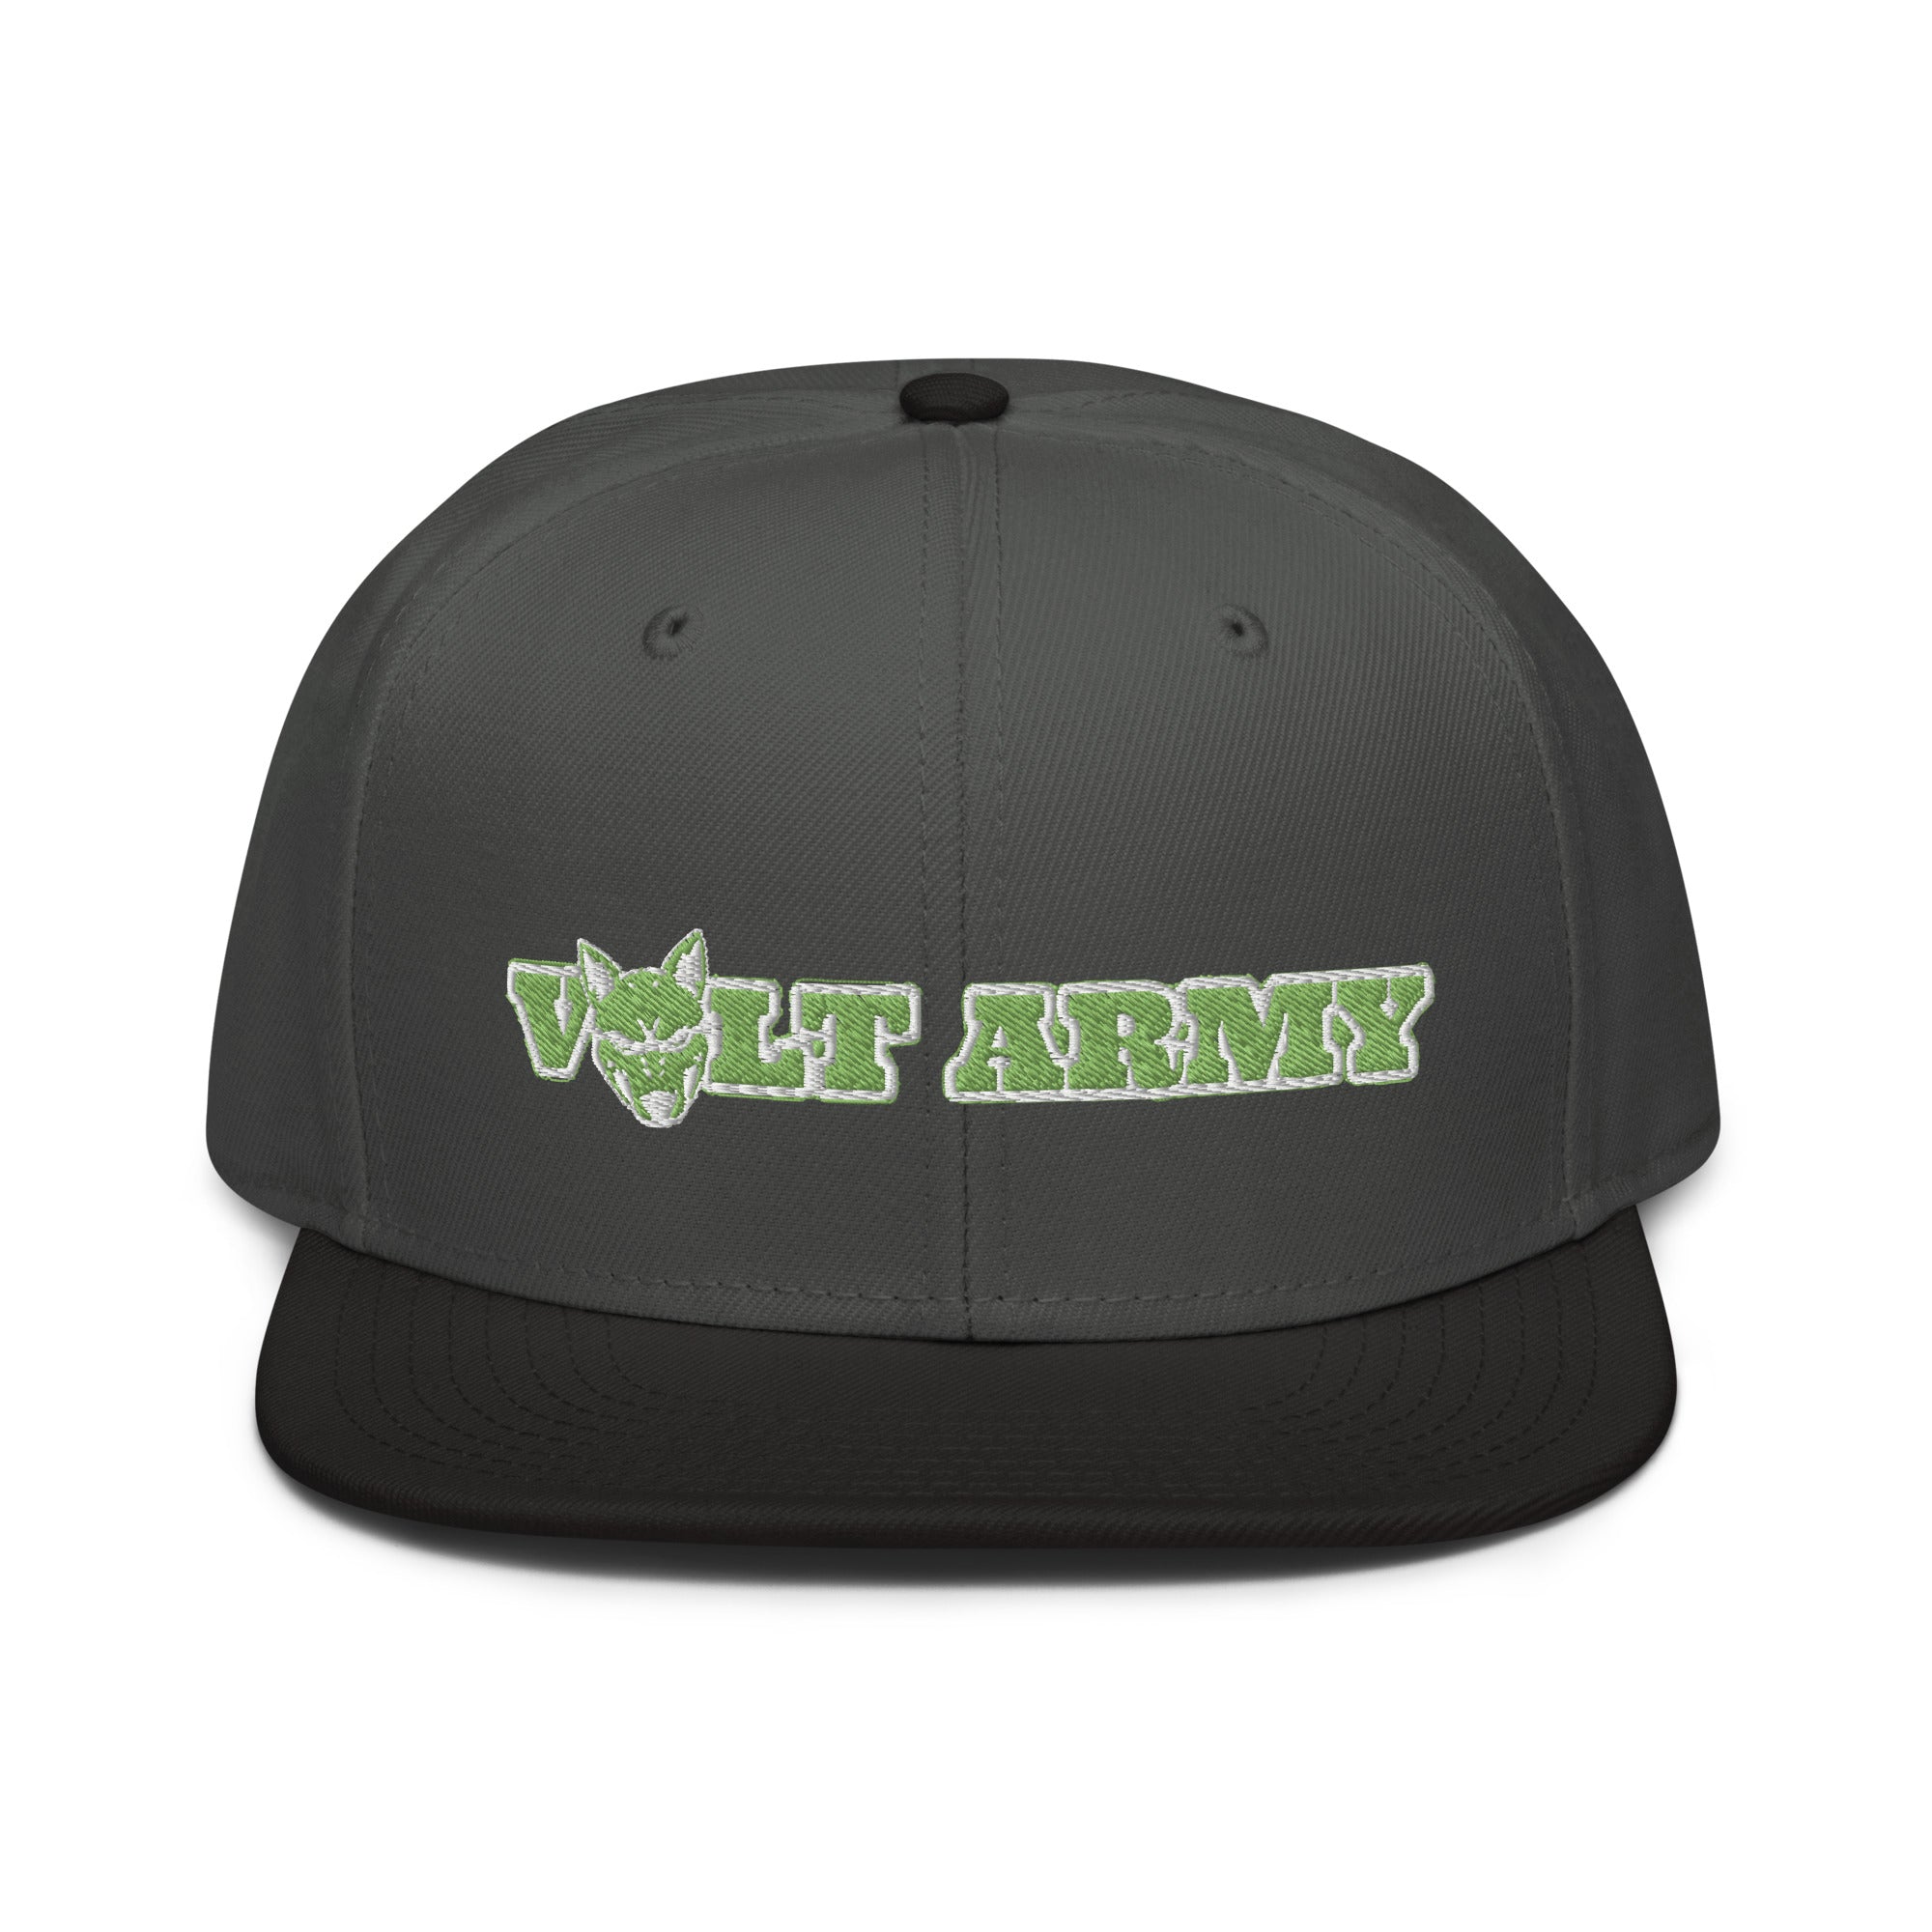 Volt Army White n Green Embroidery Snapback⚡️NFTees - NFTees365